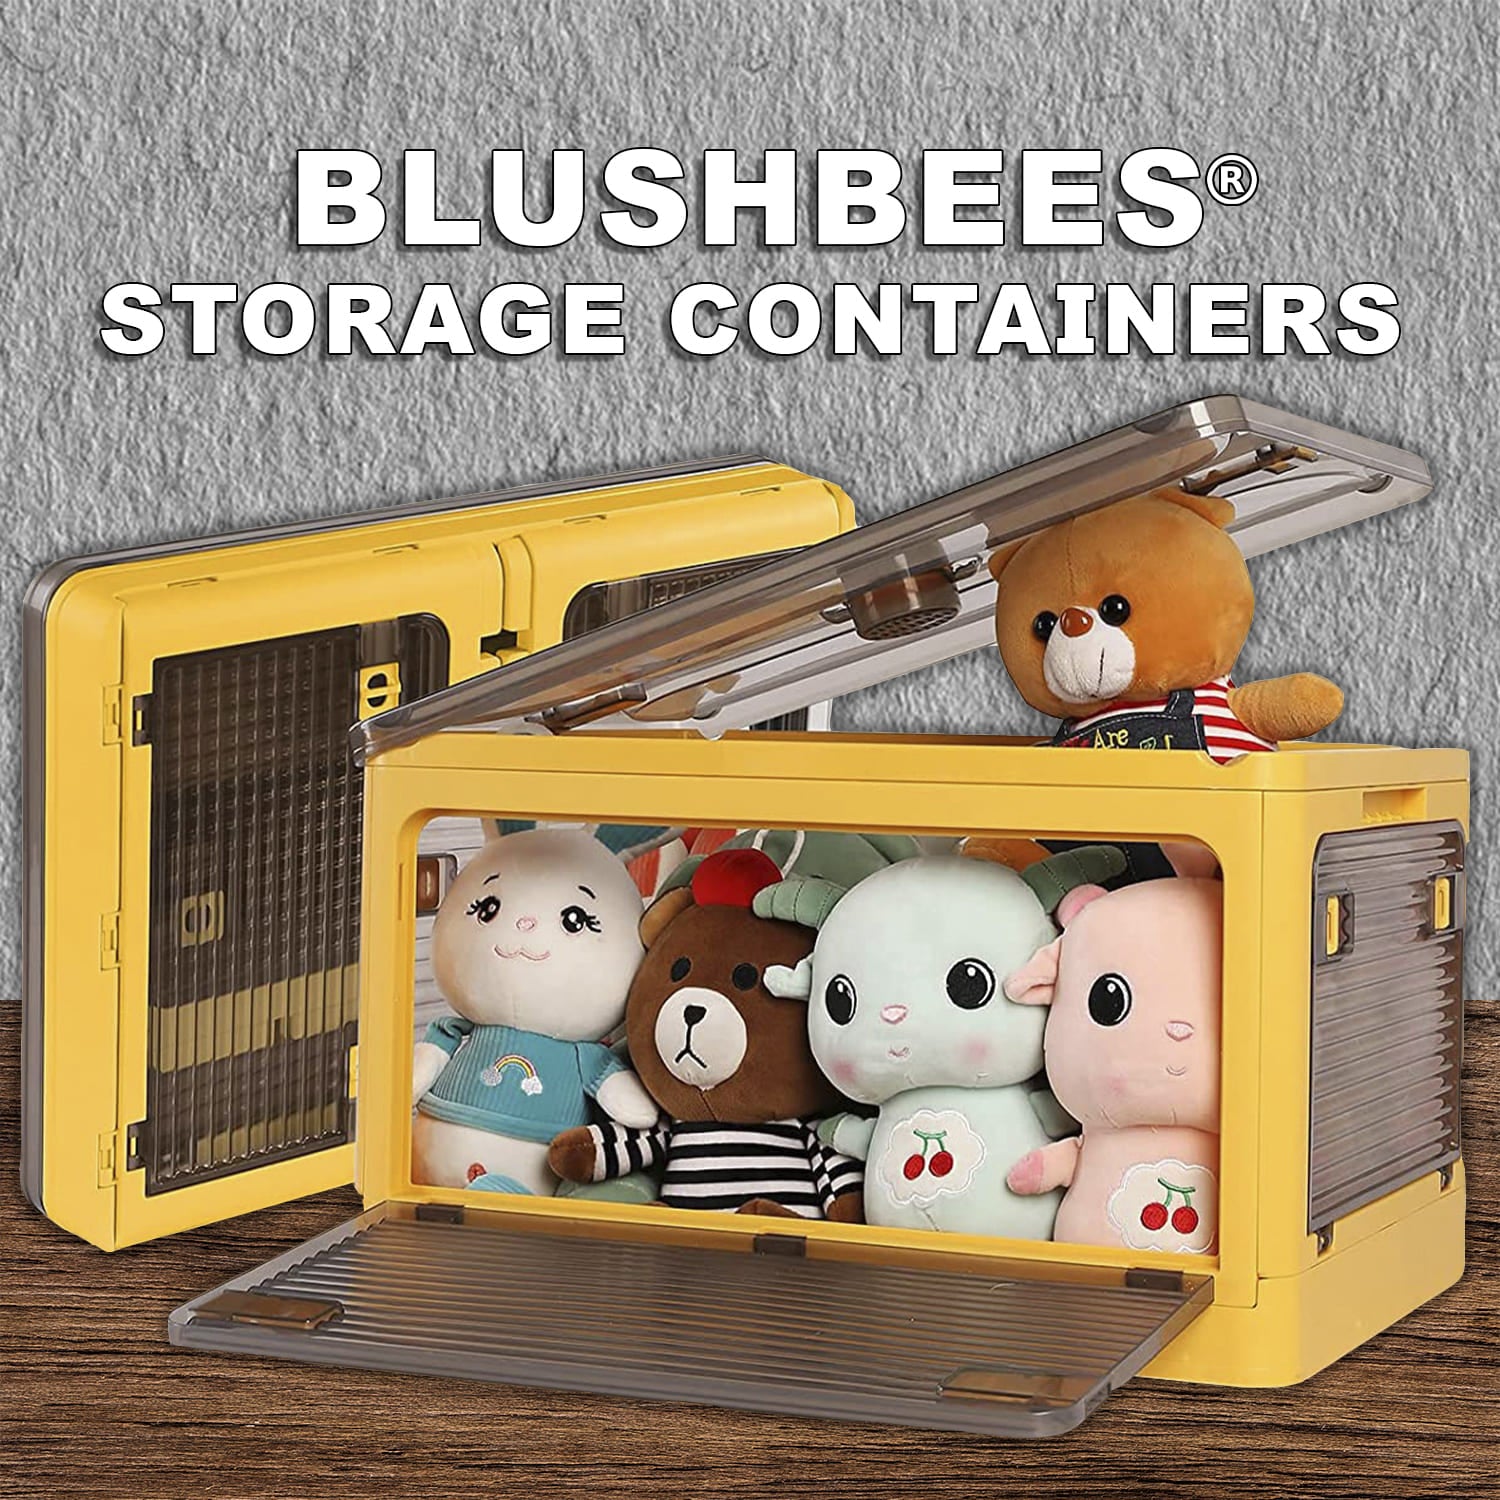 BlushBees® Storage Containers, For Clothes, Blankets, Kitchen Items, with 4 Wheels